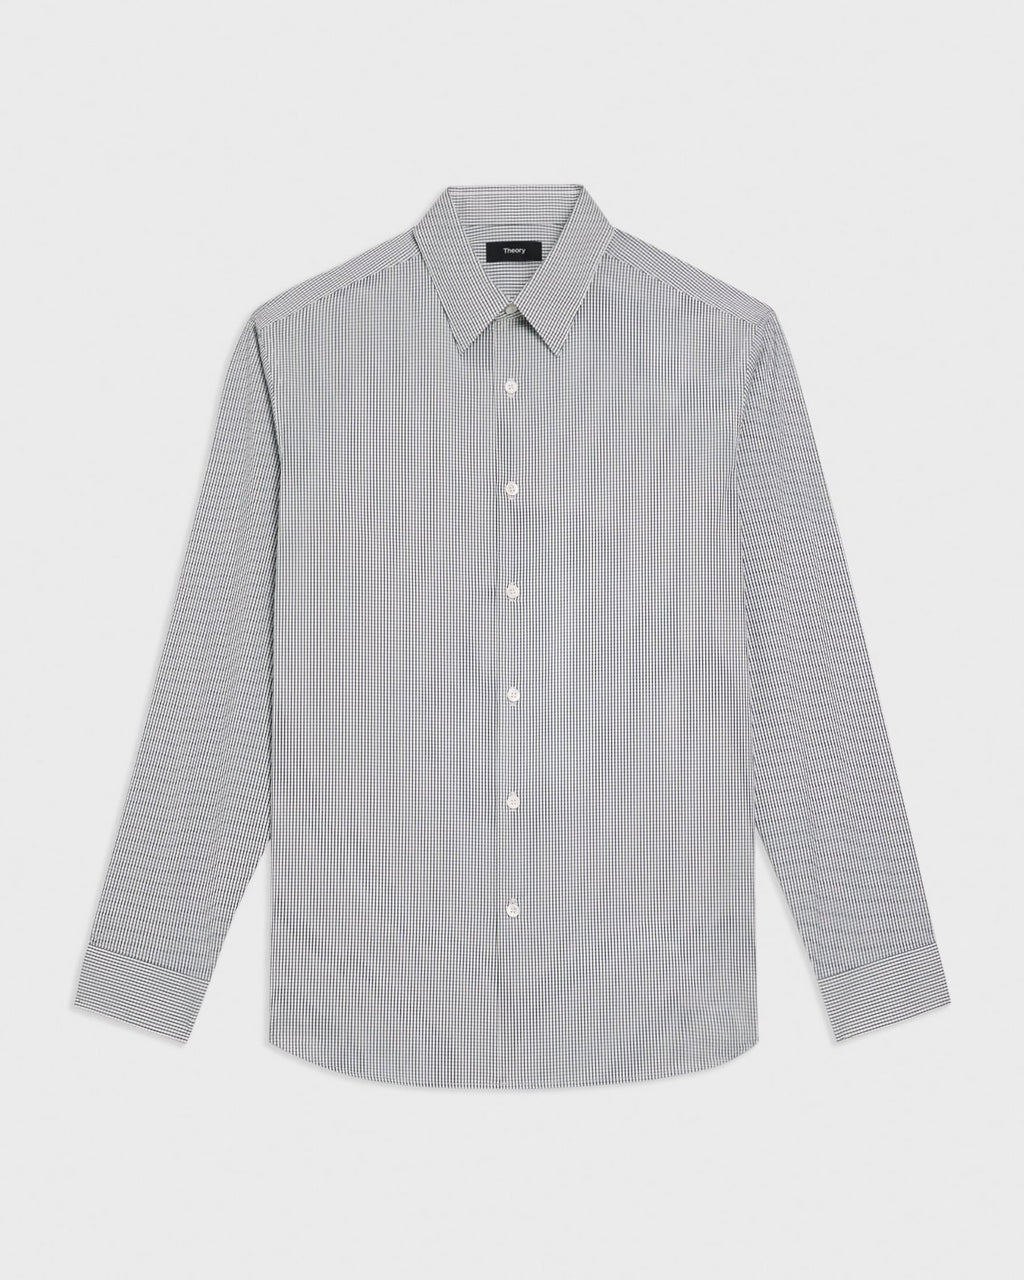 Theory Irving Shirt in Checked Good Cotton - White/baltic